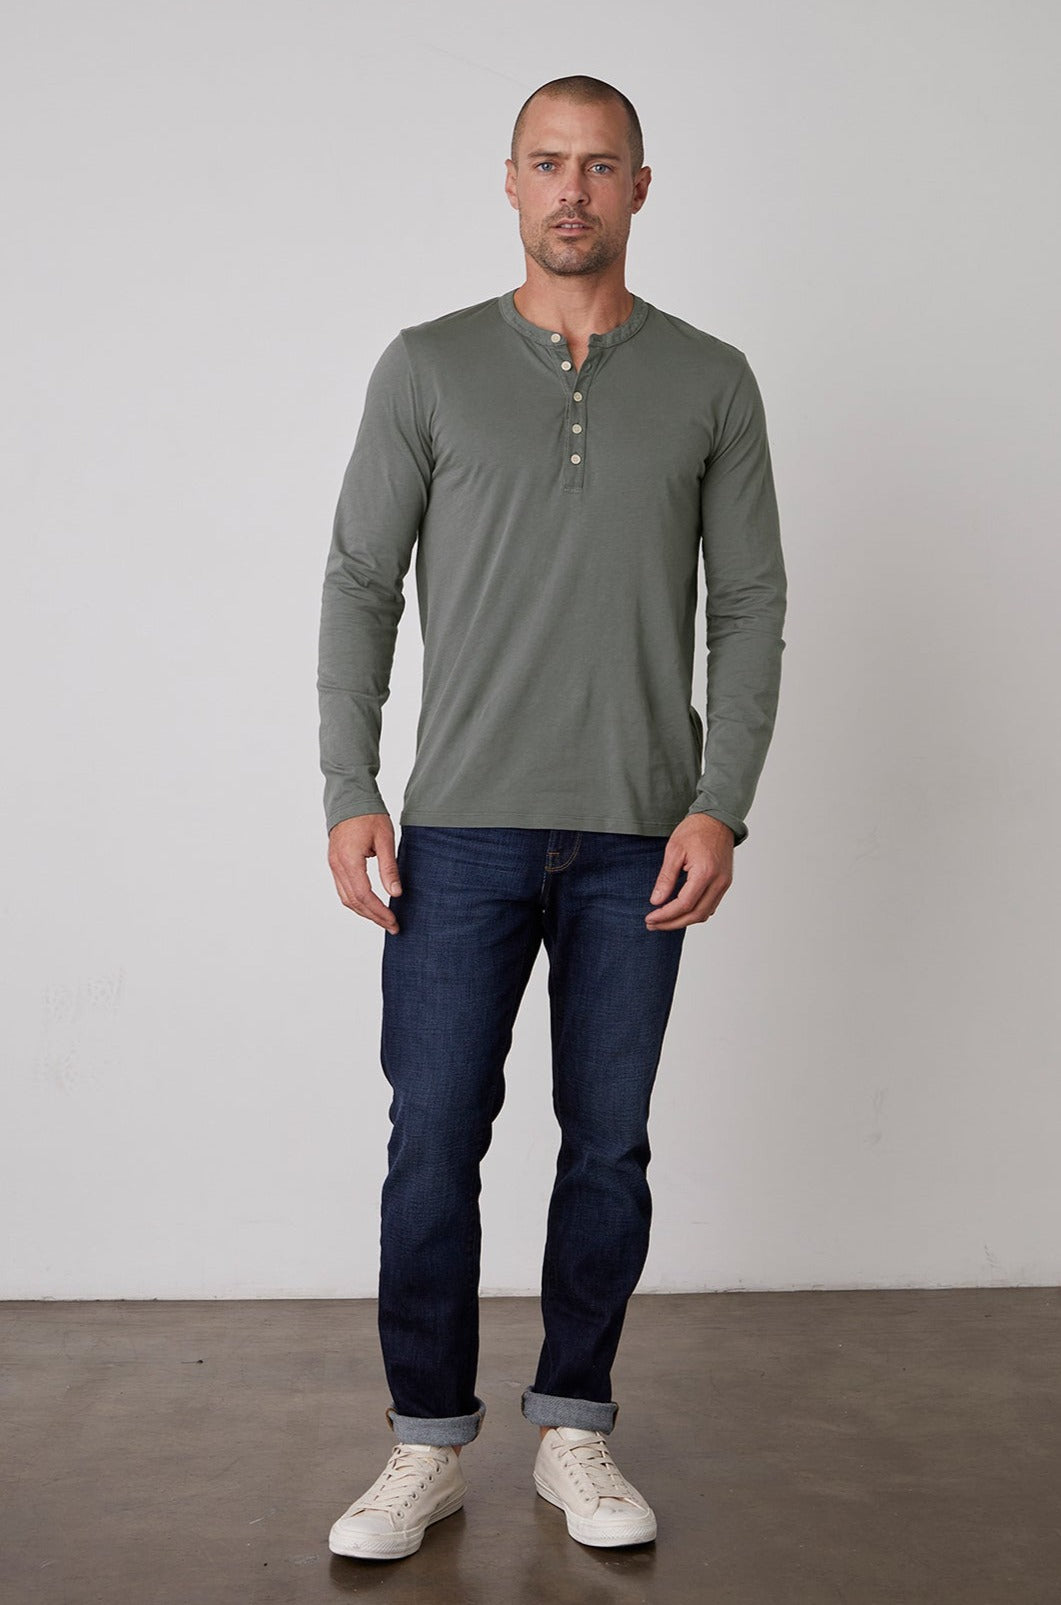 A man standing against a plain background is wearing a green ALVARO HENLEY by Velvet by Graham & Spencer, dark blue jeans, and white sneakers.-23778972467393